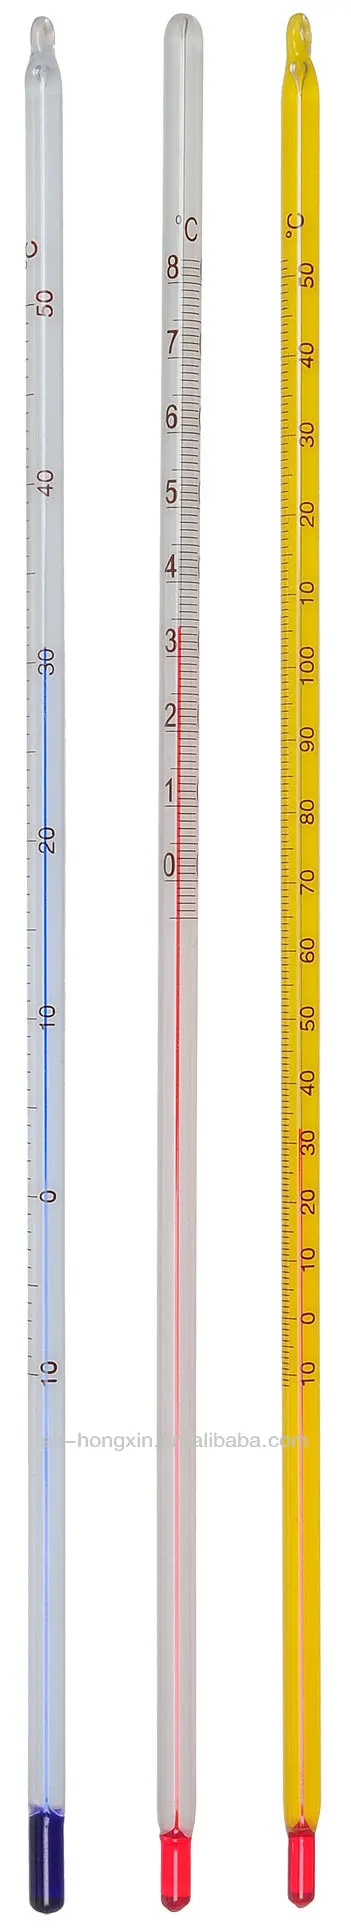 Glass Celsius thermometer,-30degree To 100degree,300mm,Laboratory Glassware   ^ 